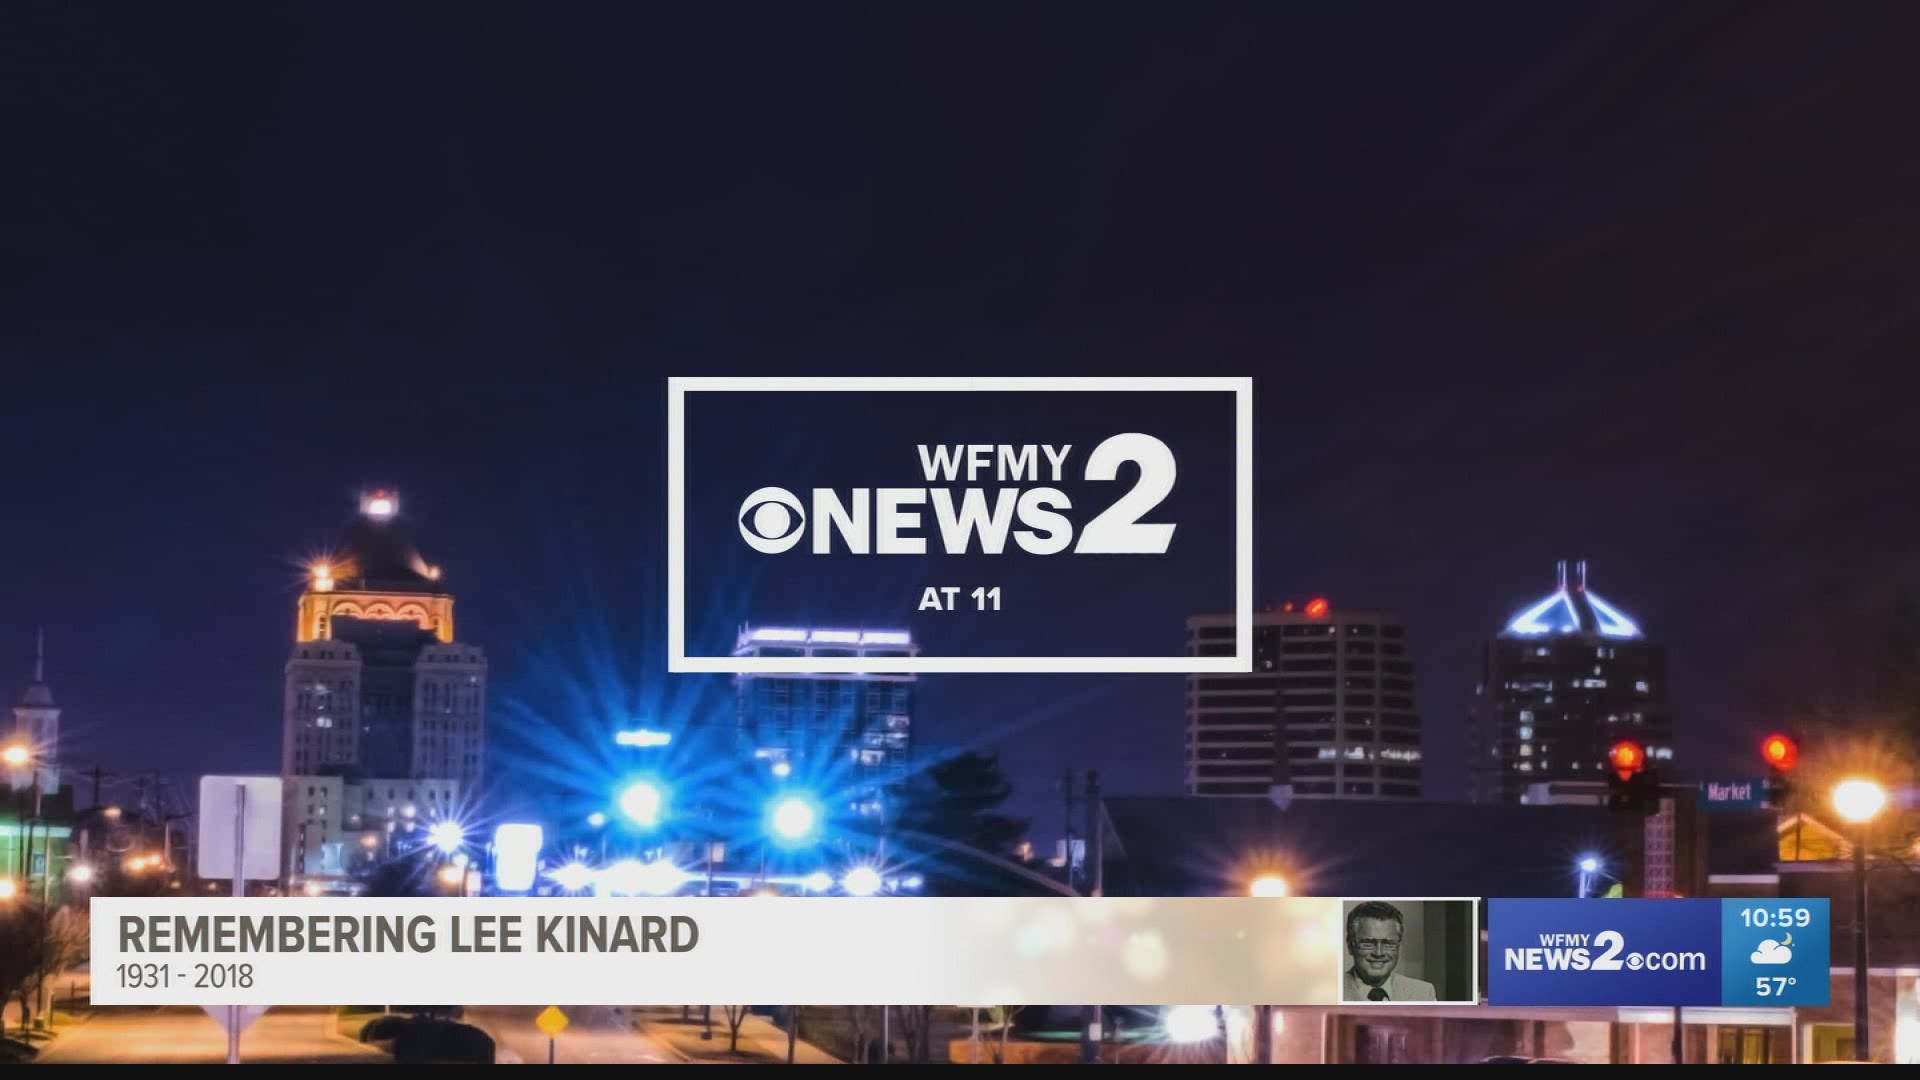 WFMY News 2, our long-time family member Lee Kinard has died. Lee Kinard started working at WFMY News 2 on April 16, 1956